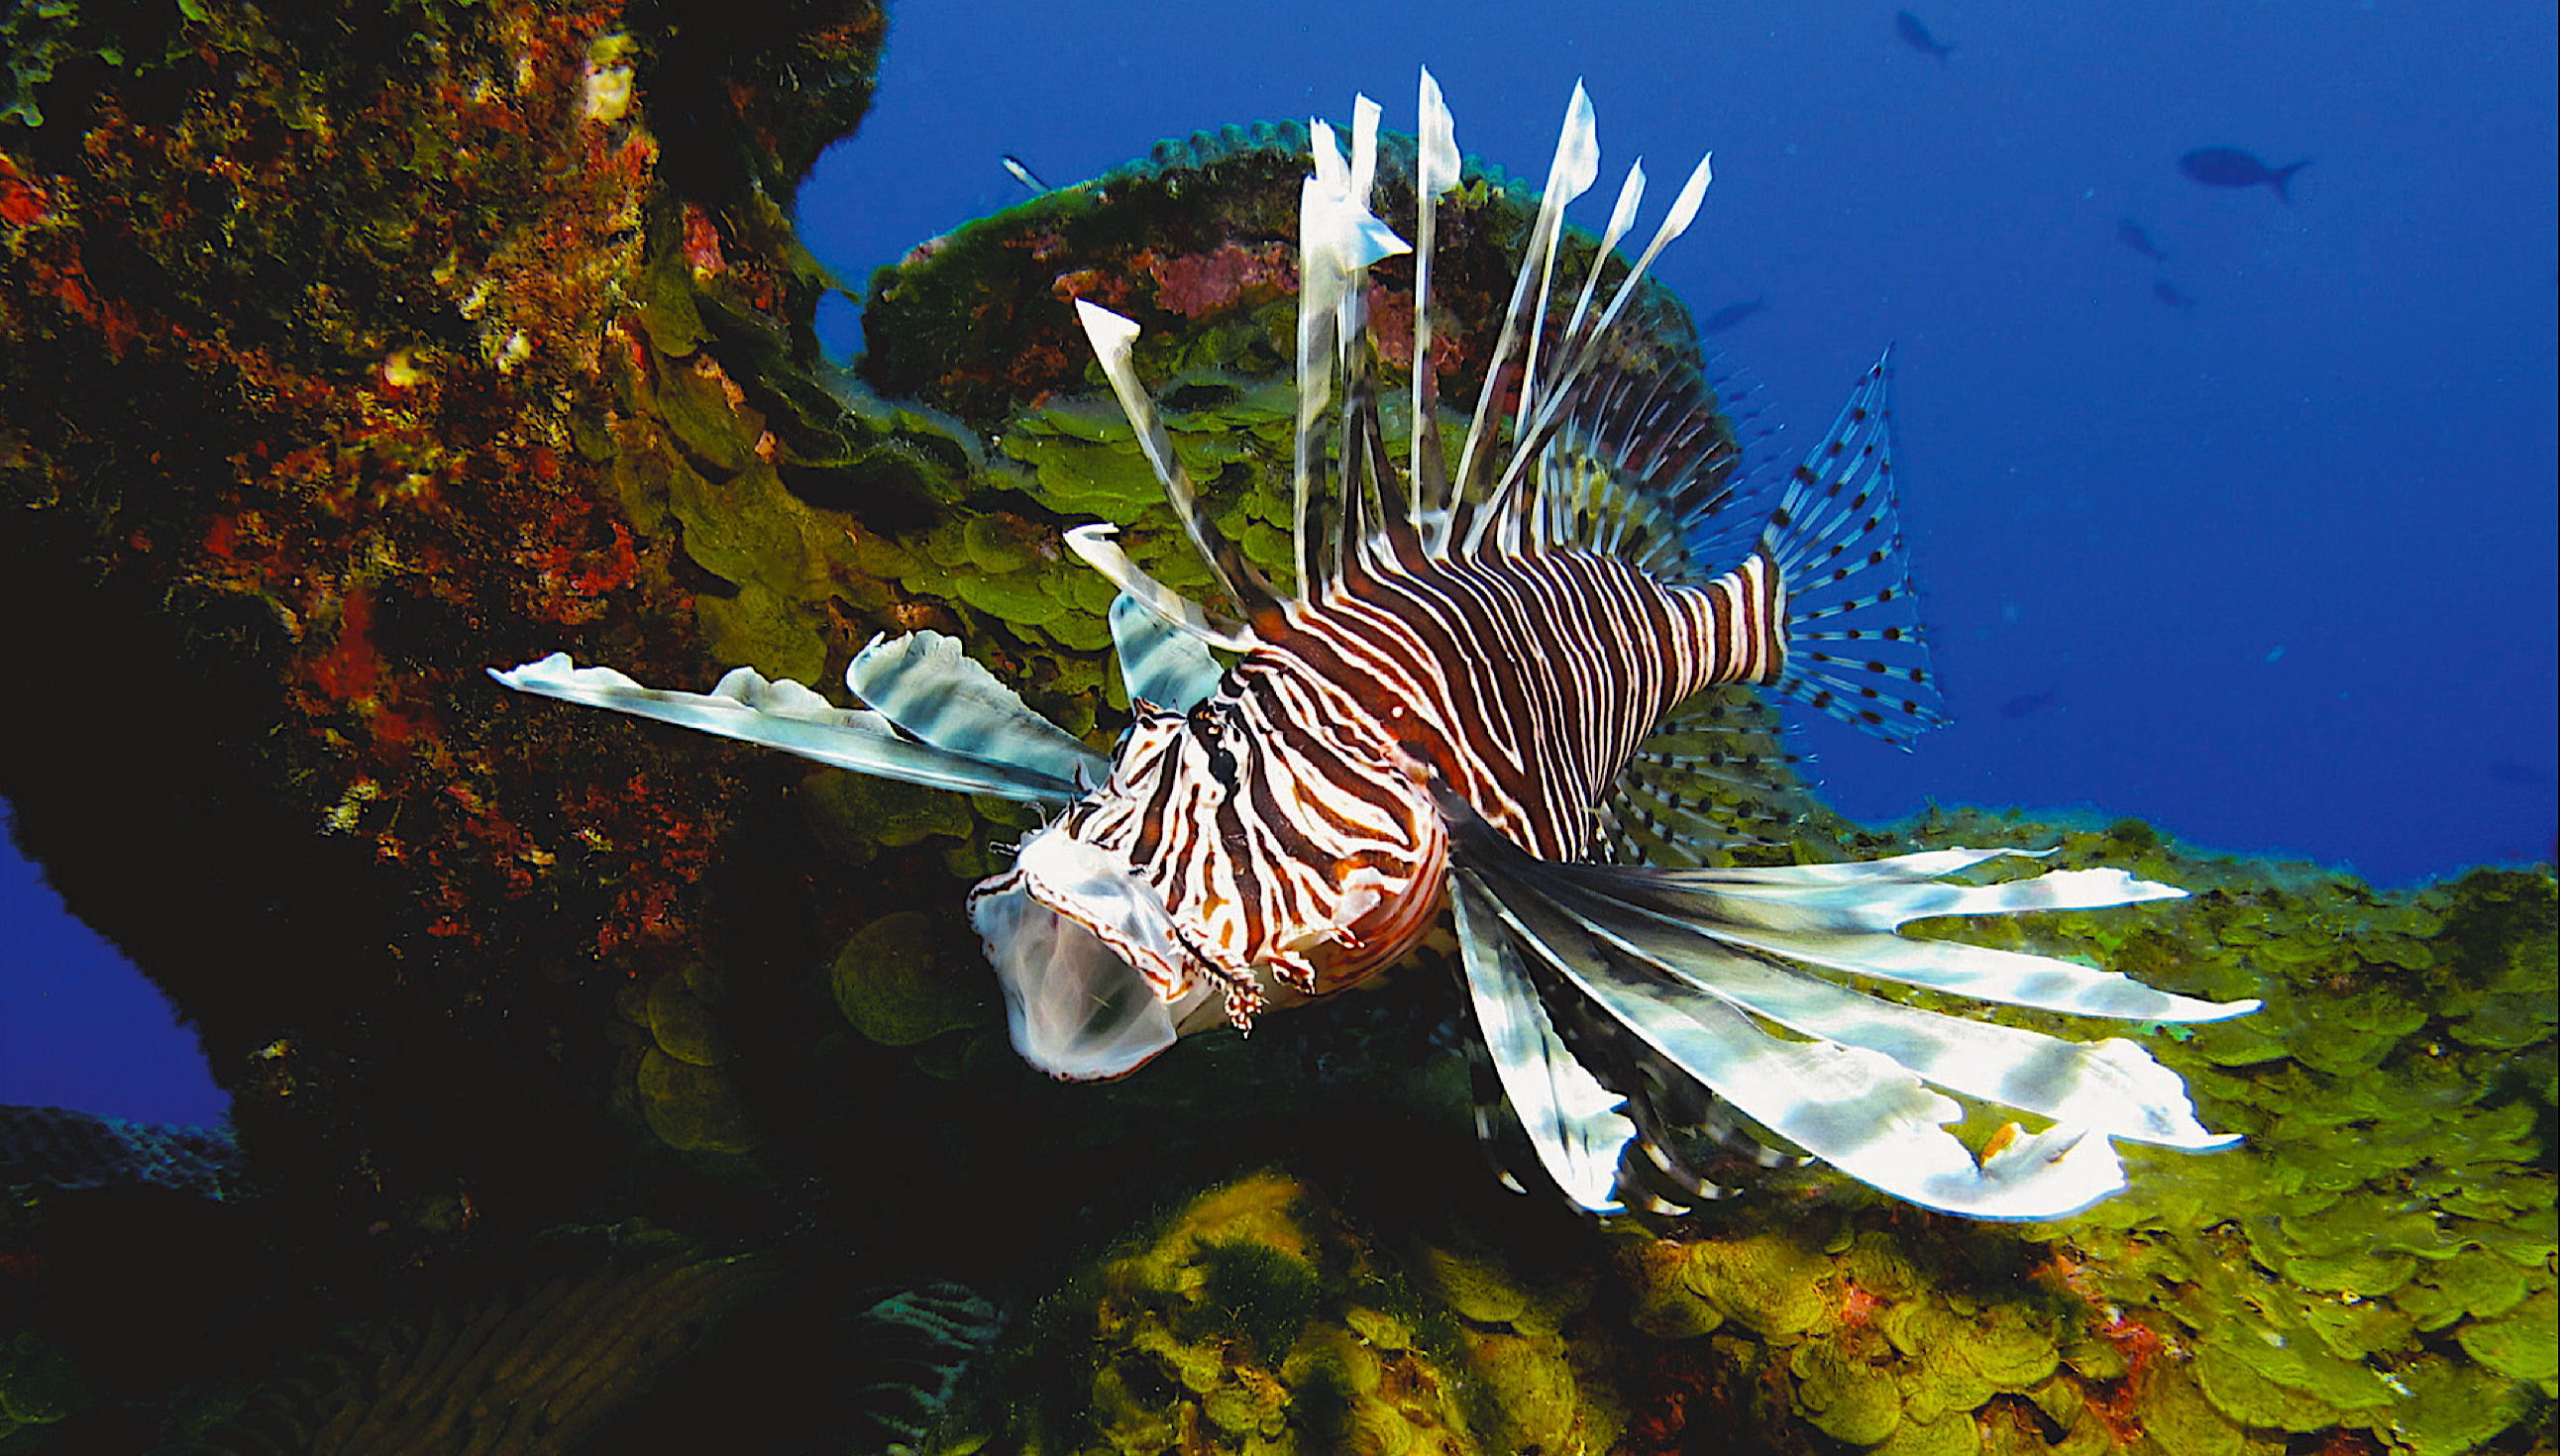 image: Scientists found evidence of lionfish much farther inland than they expected. Credit: NOAA.